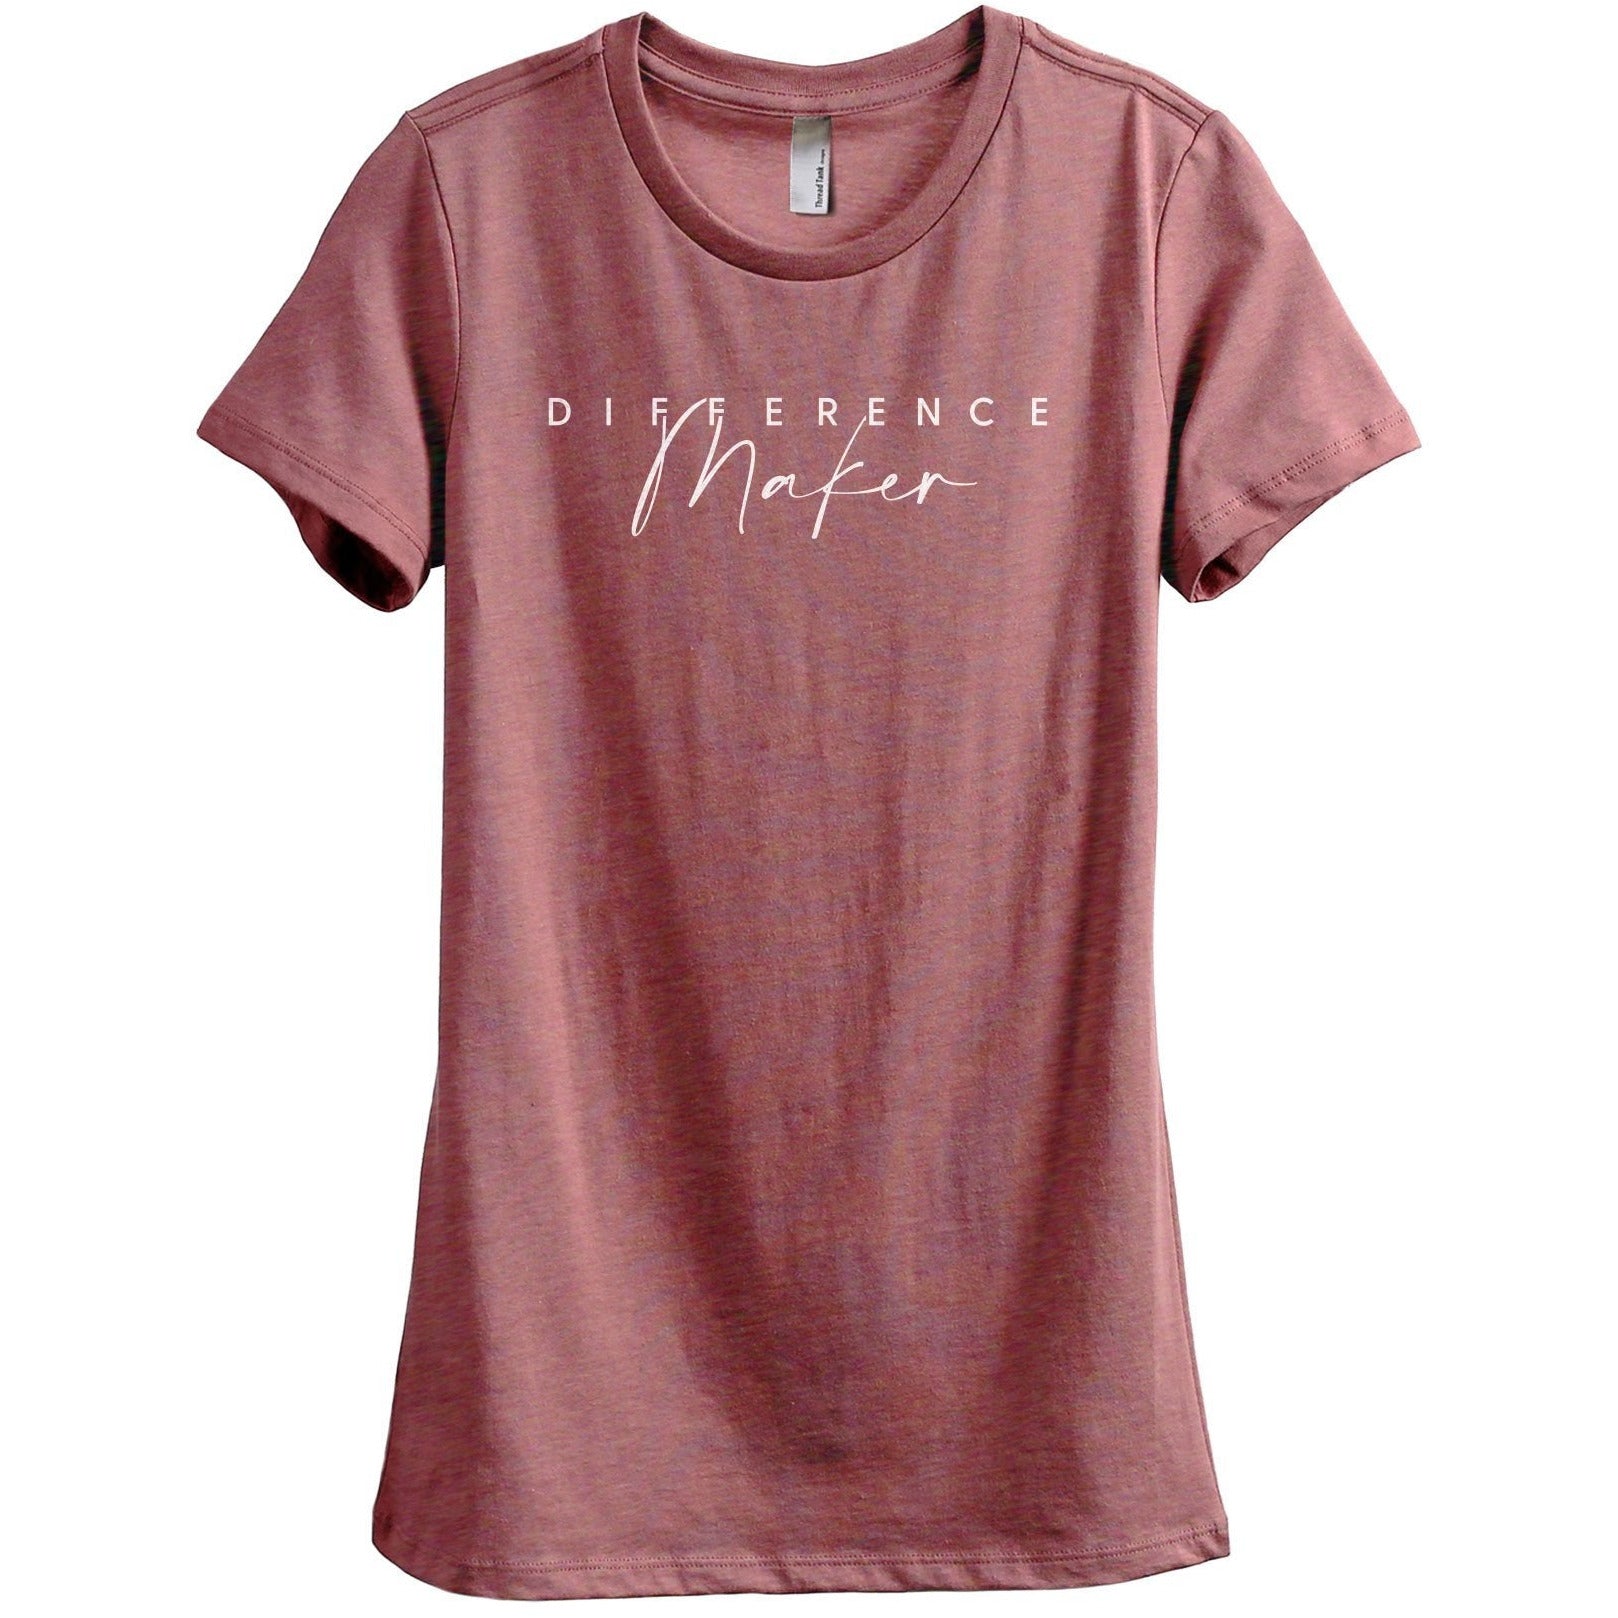 Difference Maker Women's Relaxed Crewneck T-Shirt Top Tee Heather Rouge